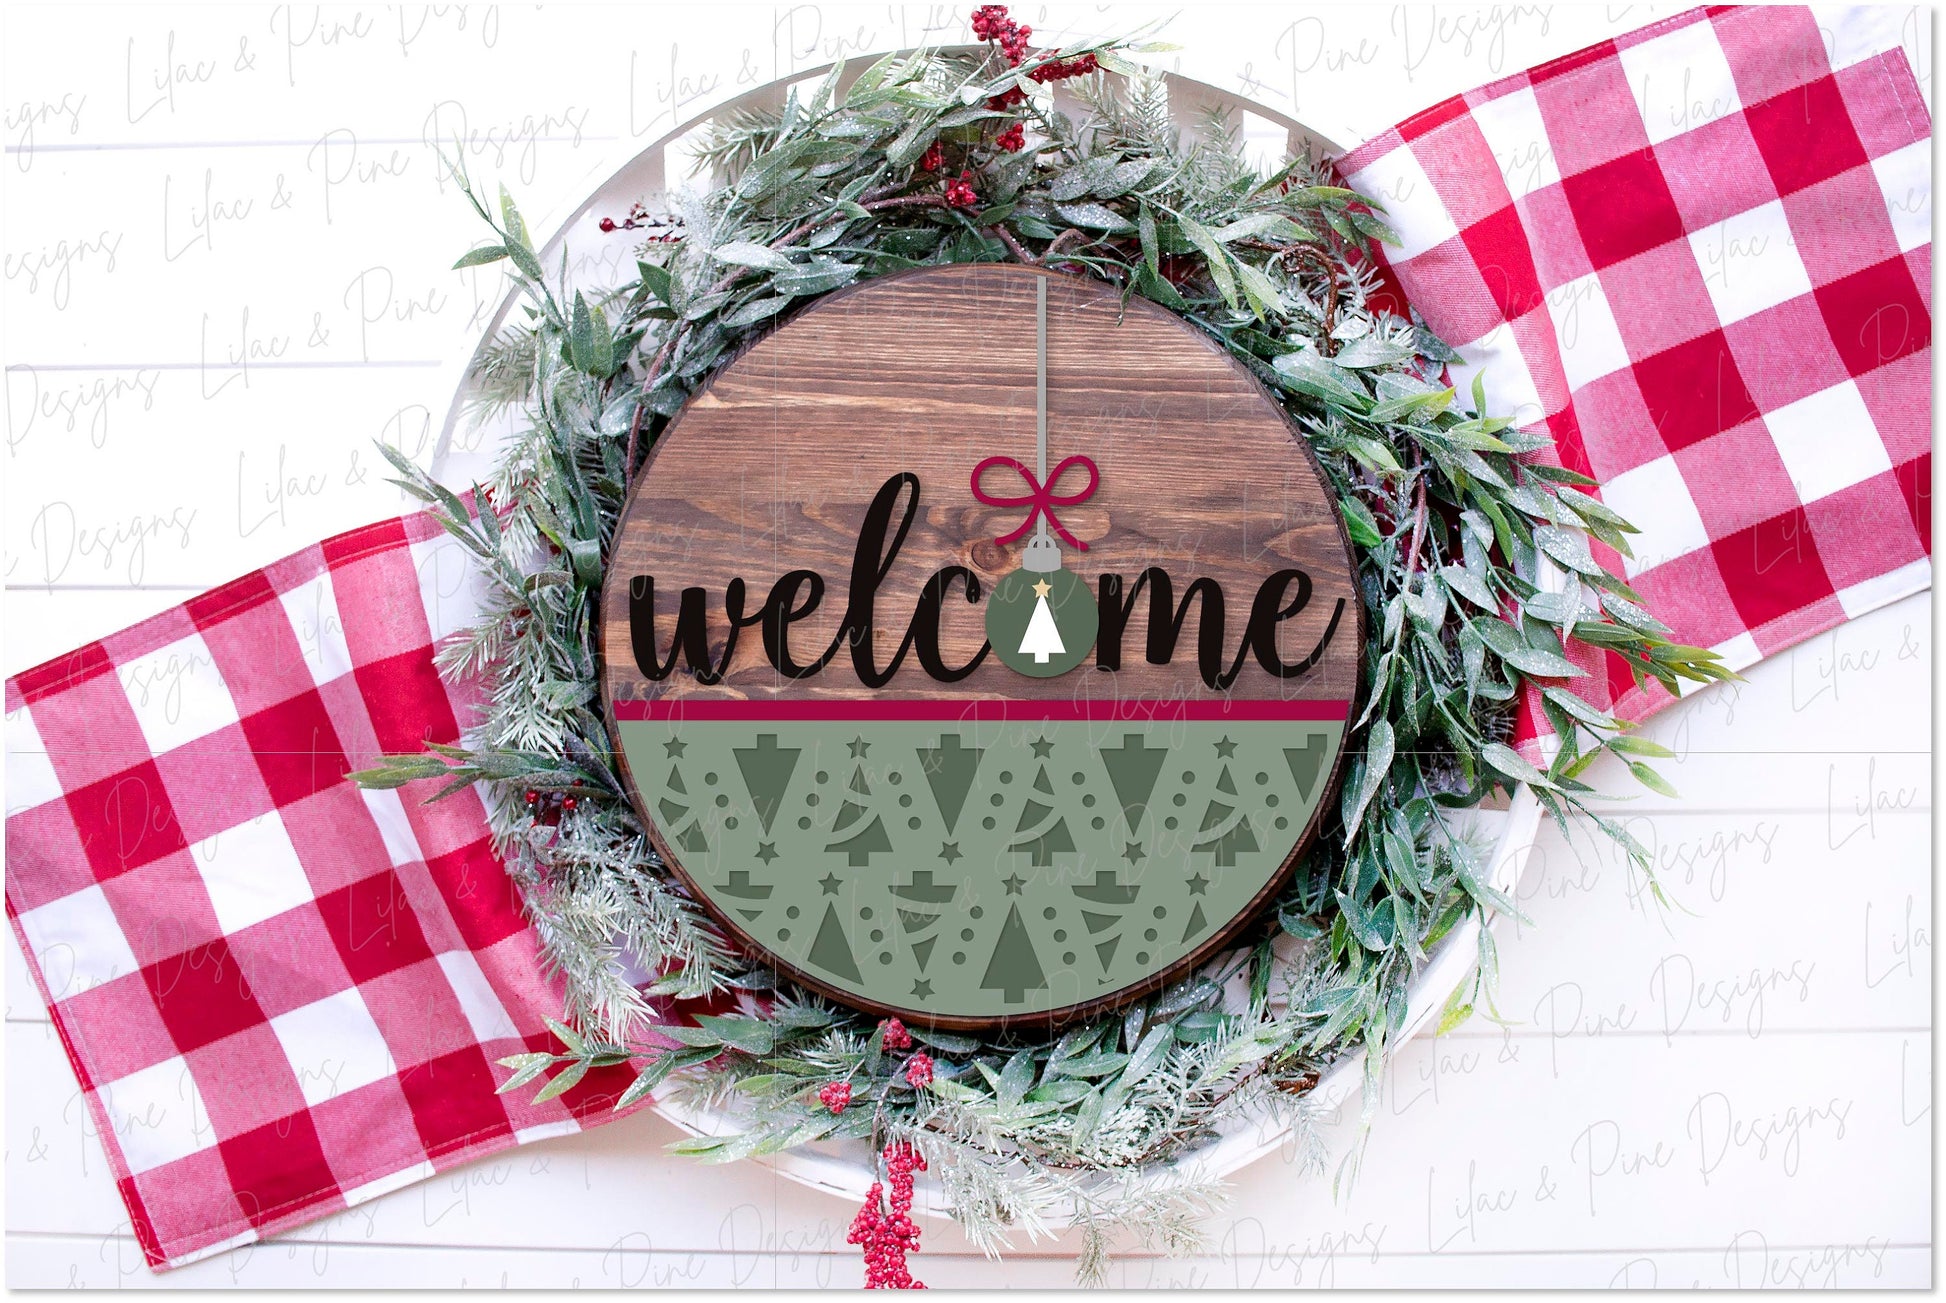 Christmas Tree welcome sign SVG, Christmas door hanger, Holiday ornament SVG, round welcome sign, Glowforge Svg, laser cut file